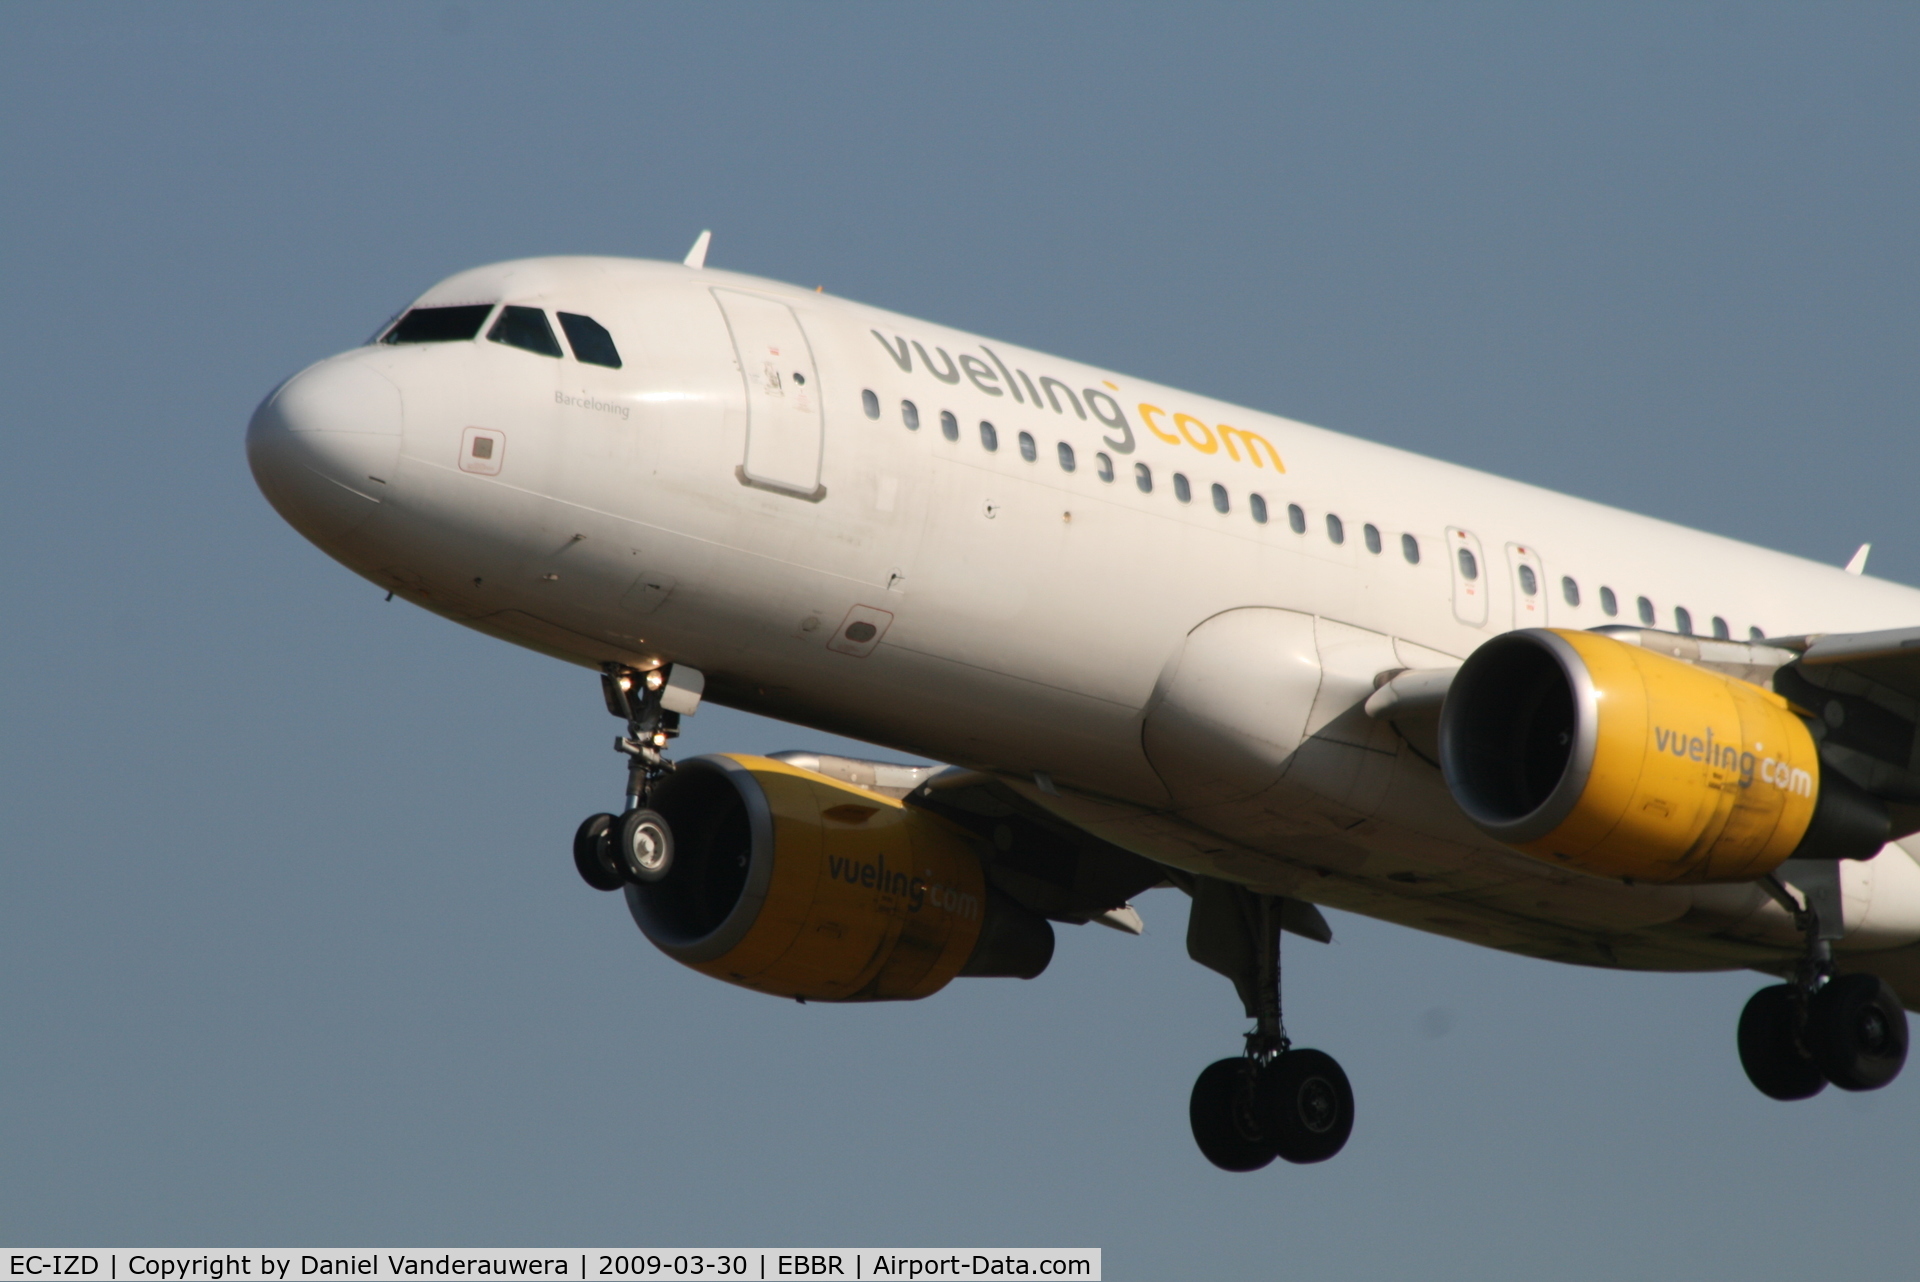 EC-IZD, 2004 Airbus A320-214 C/N 2207, Arrival of flight VY7060 to RWY 25L